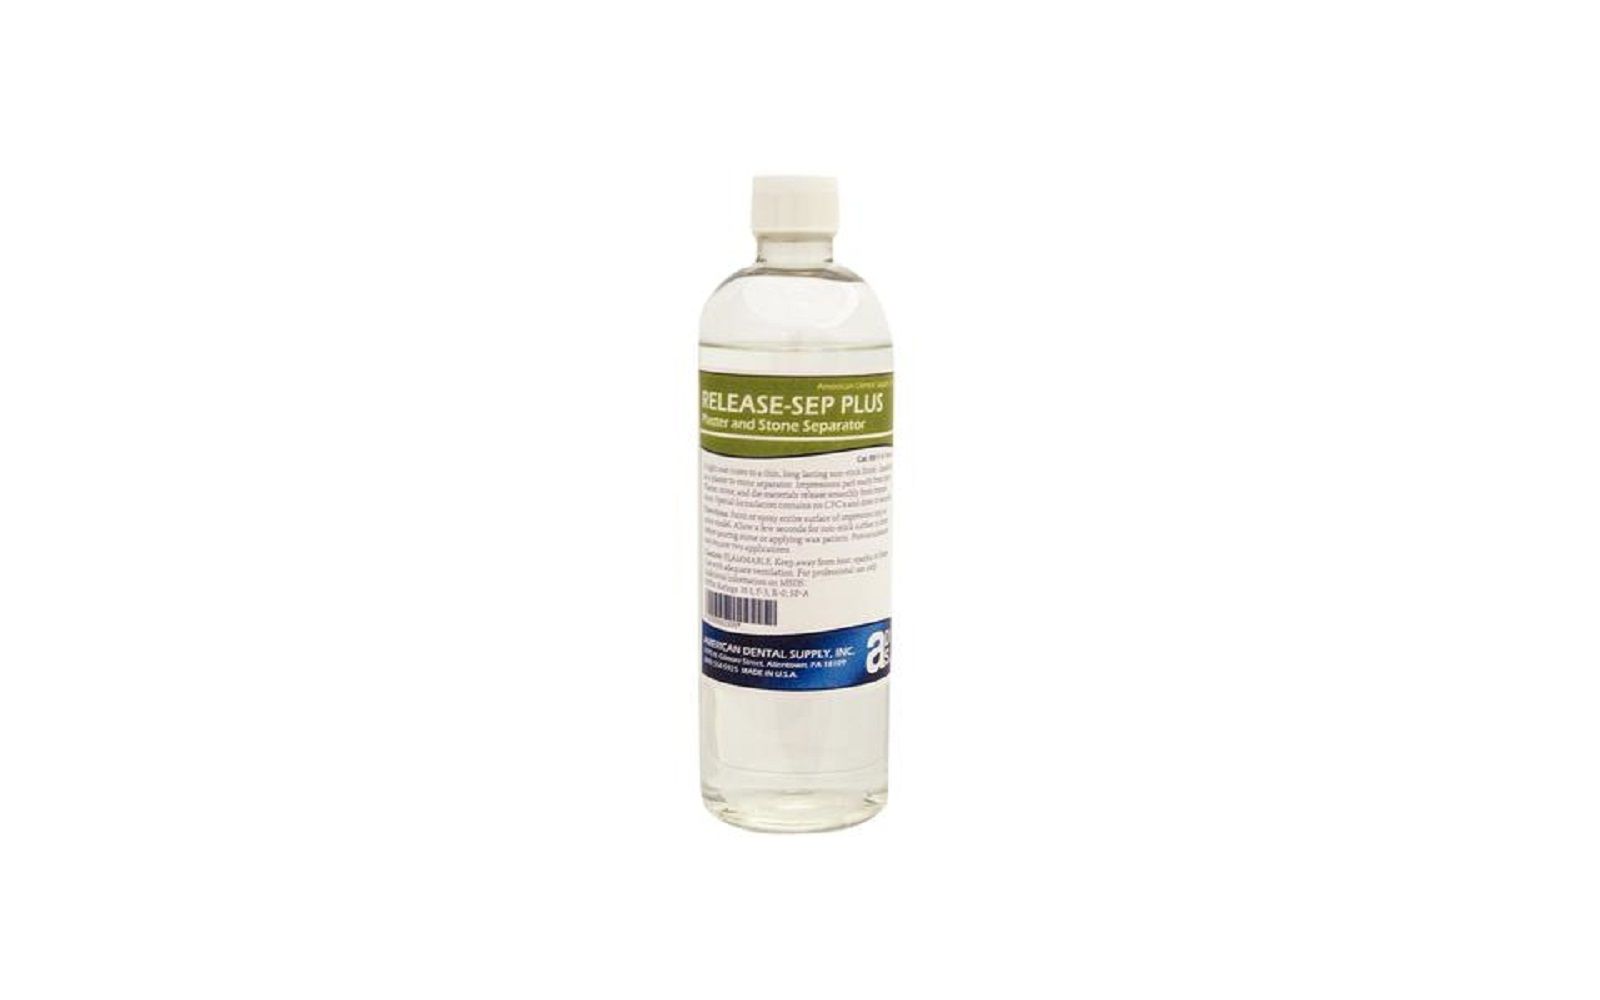 Release sep plus – plaster and stone separator – 16 oz